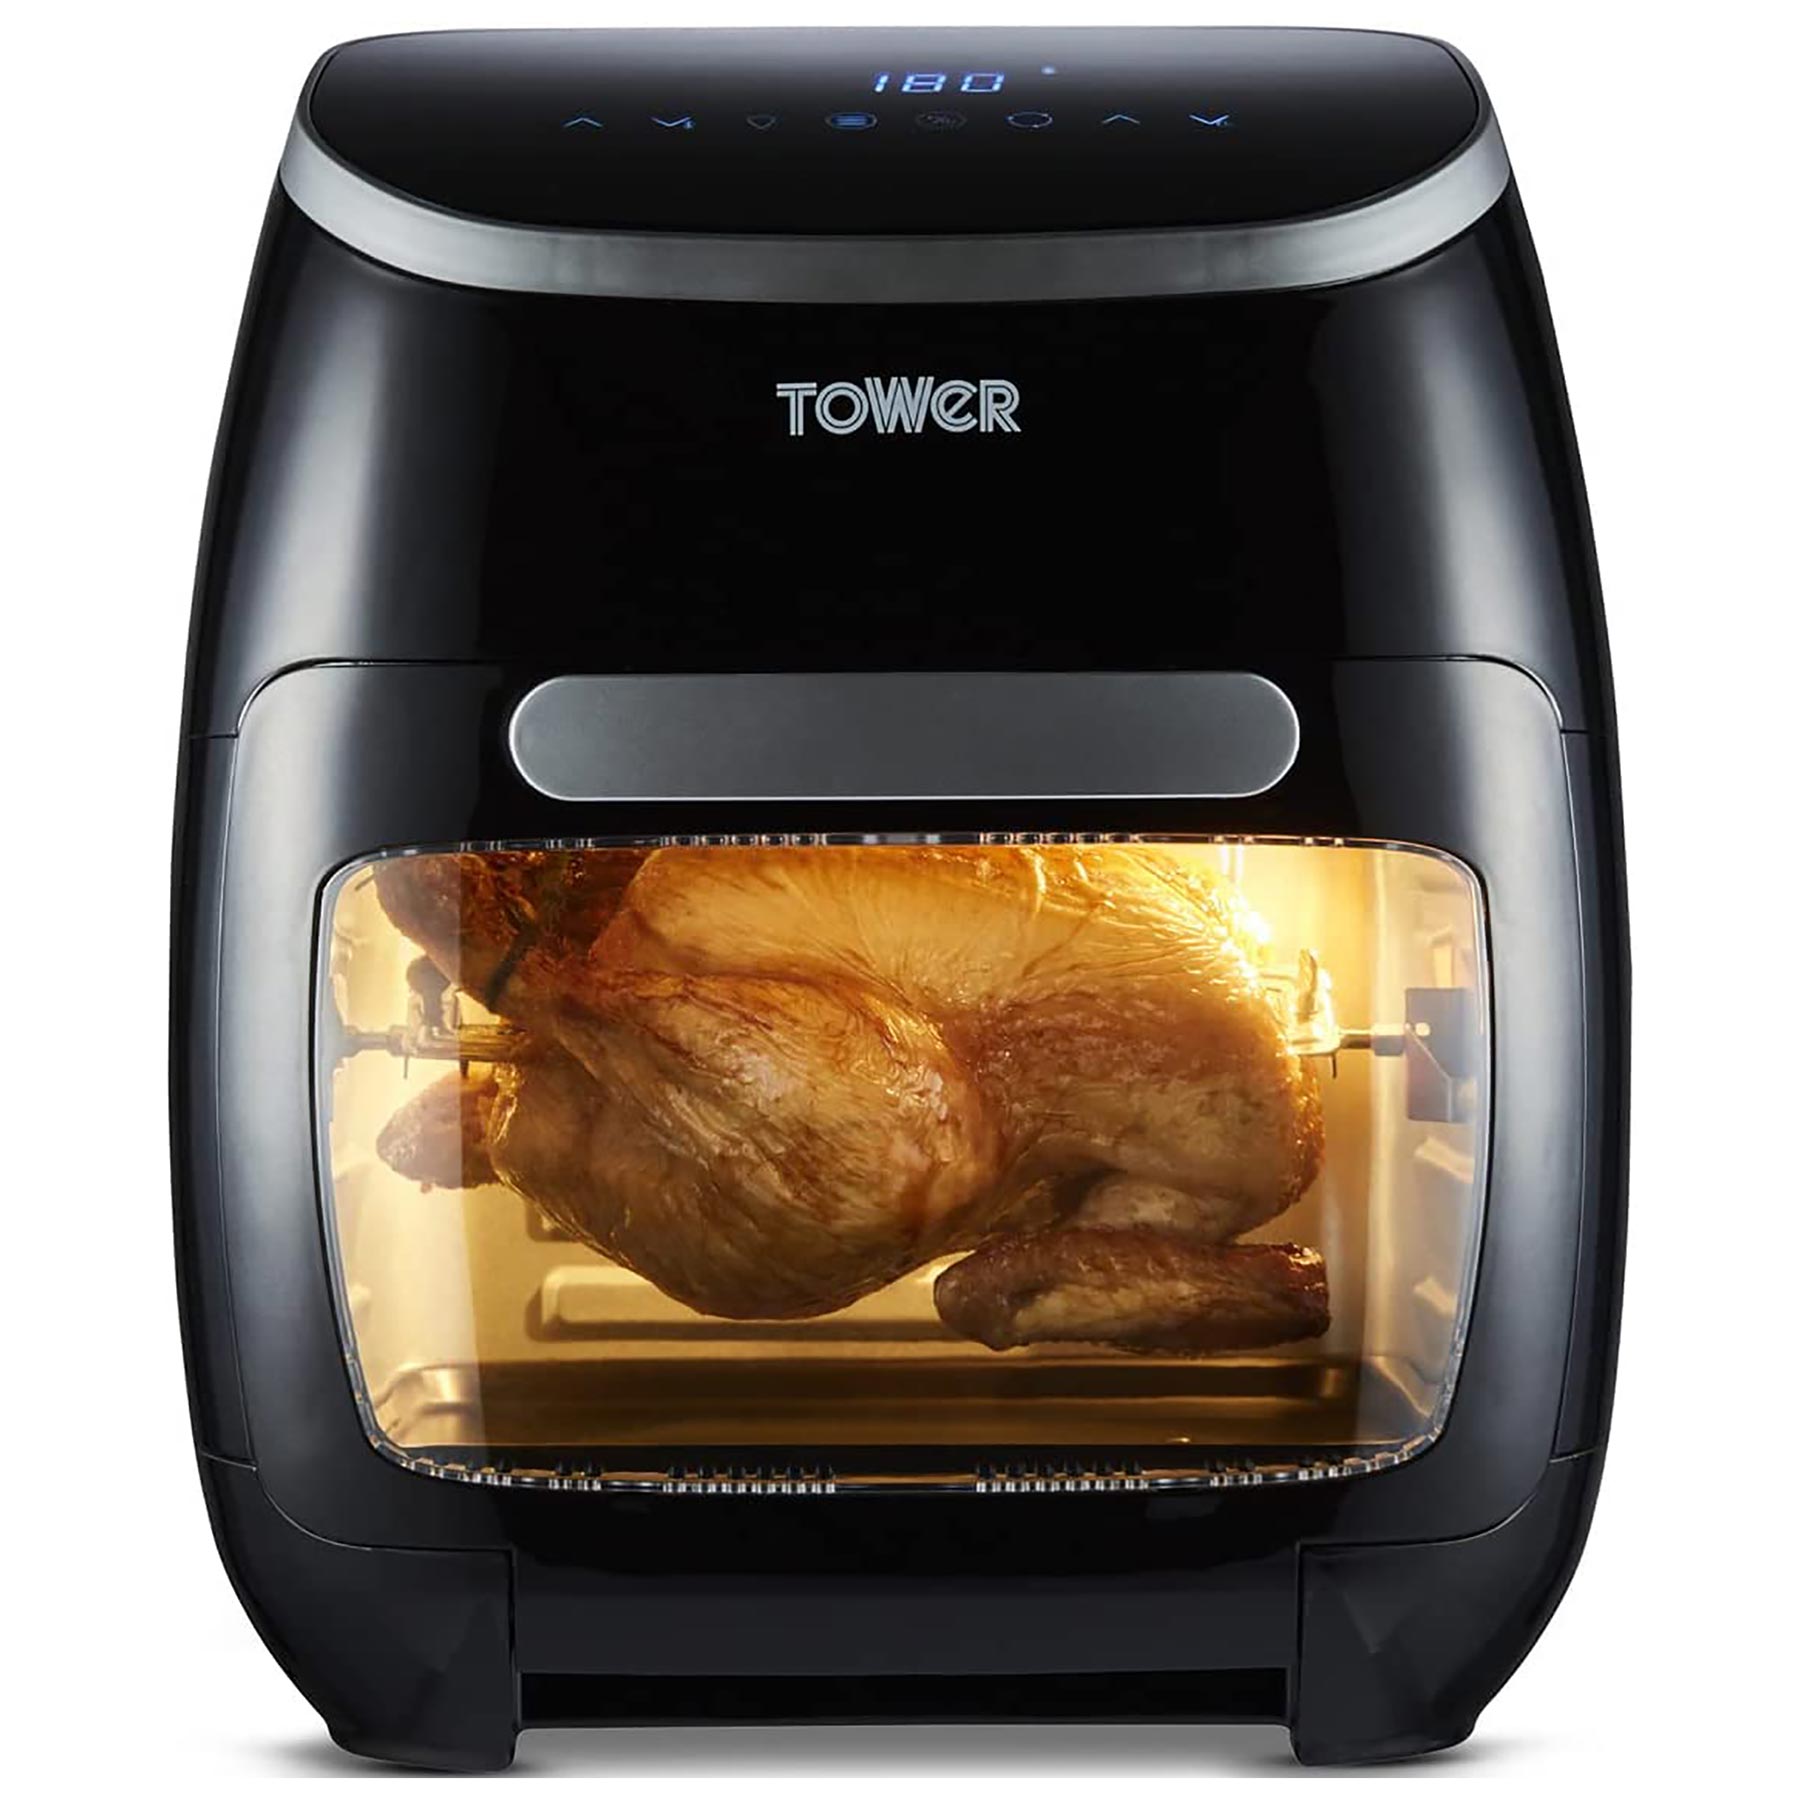 Tower T17039 11L XPRESS PRO 5 in 1 Digital Air Fryer Oven in Black